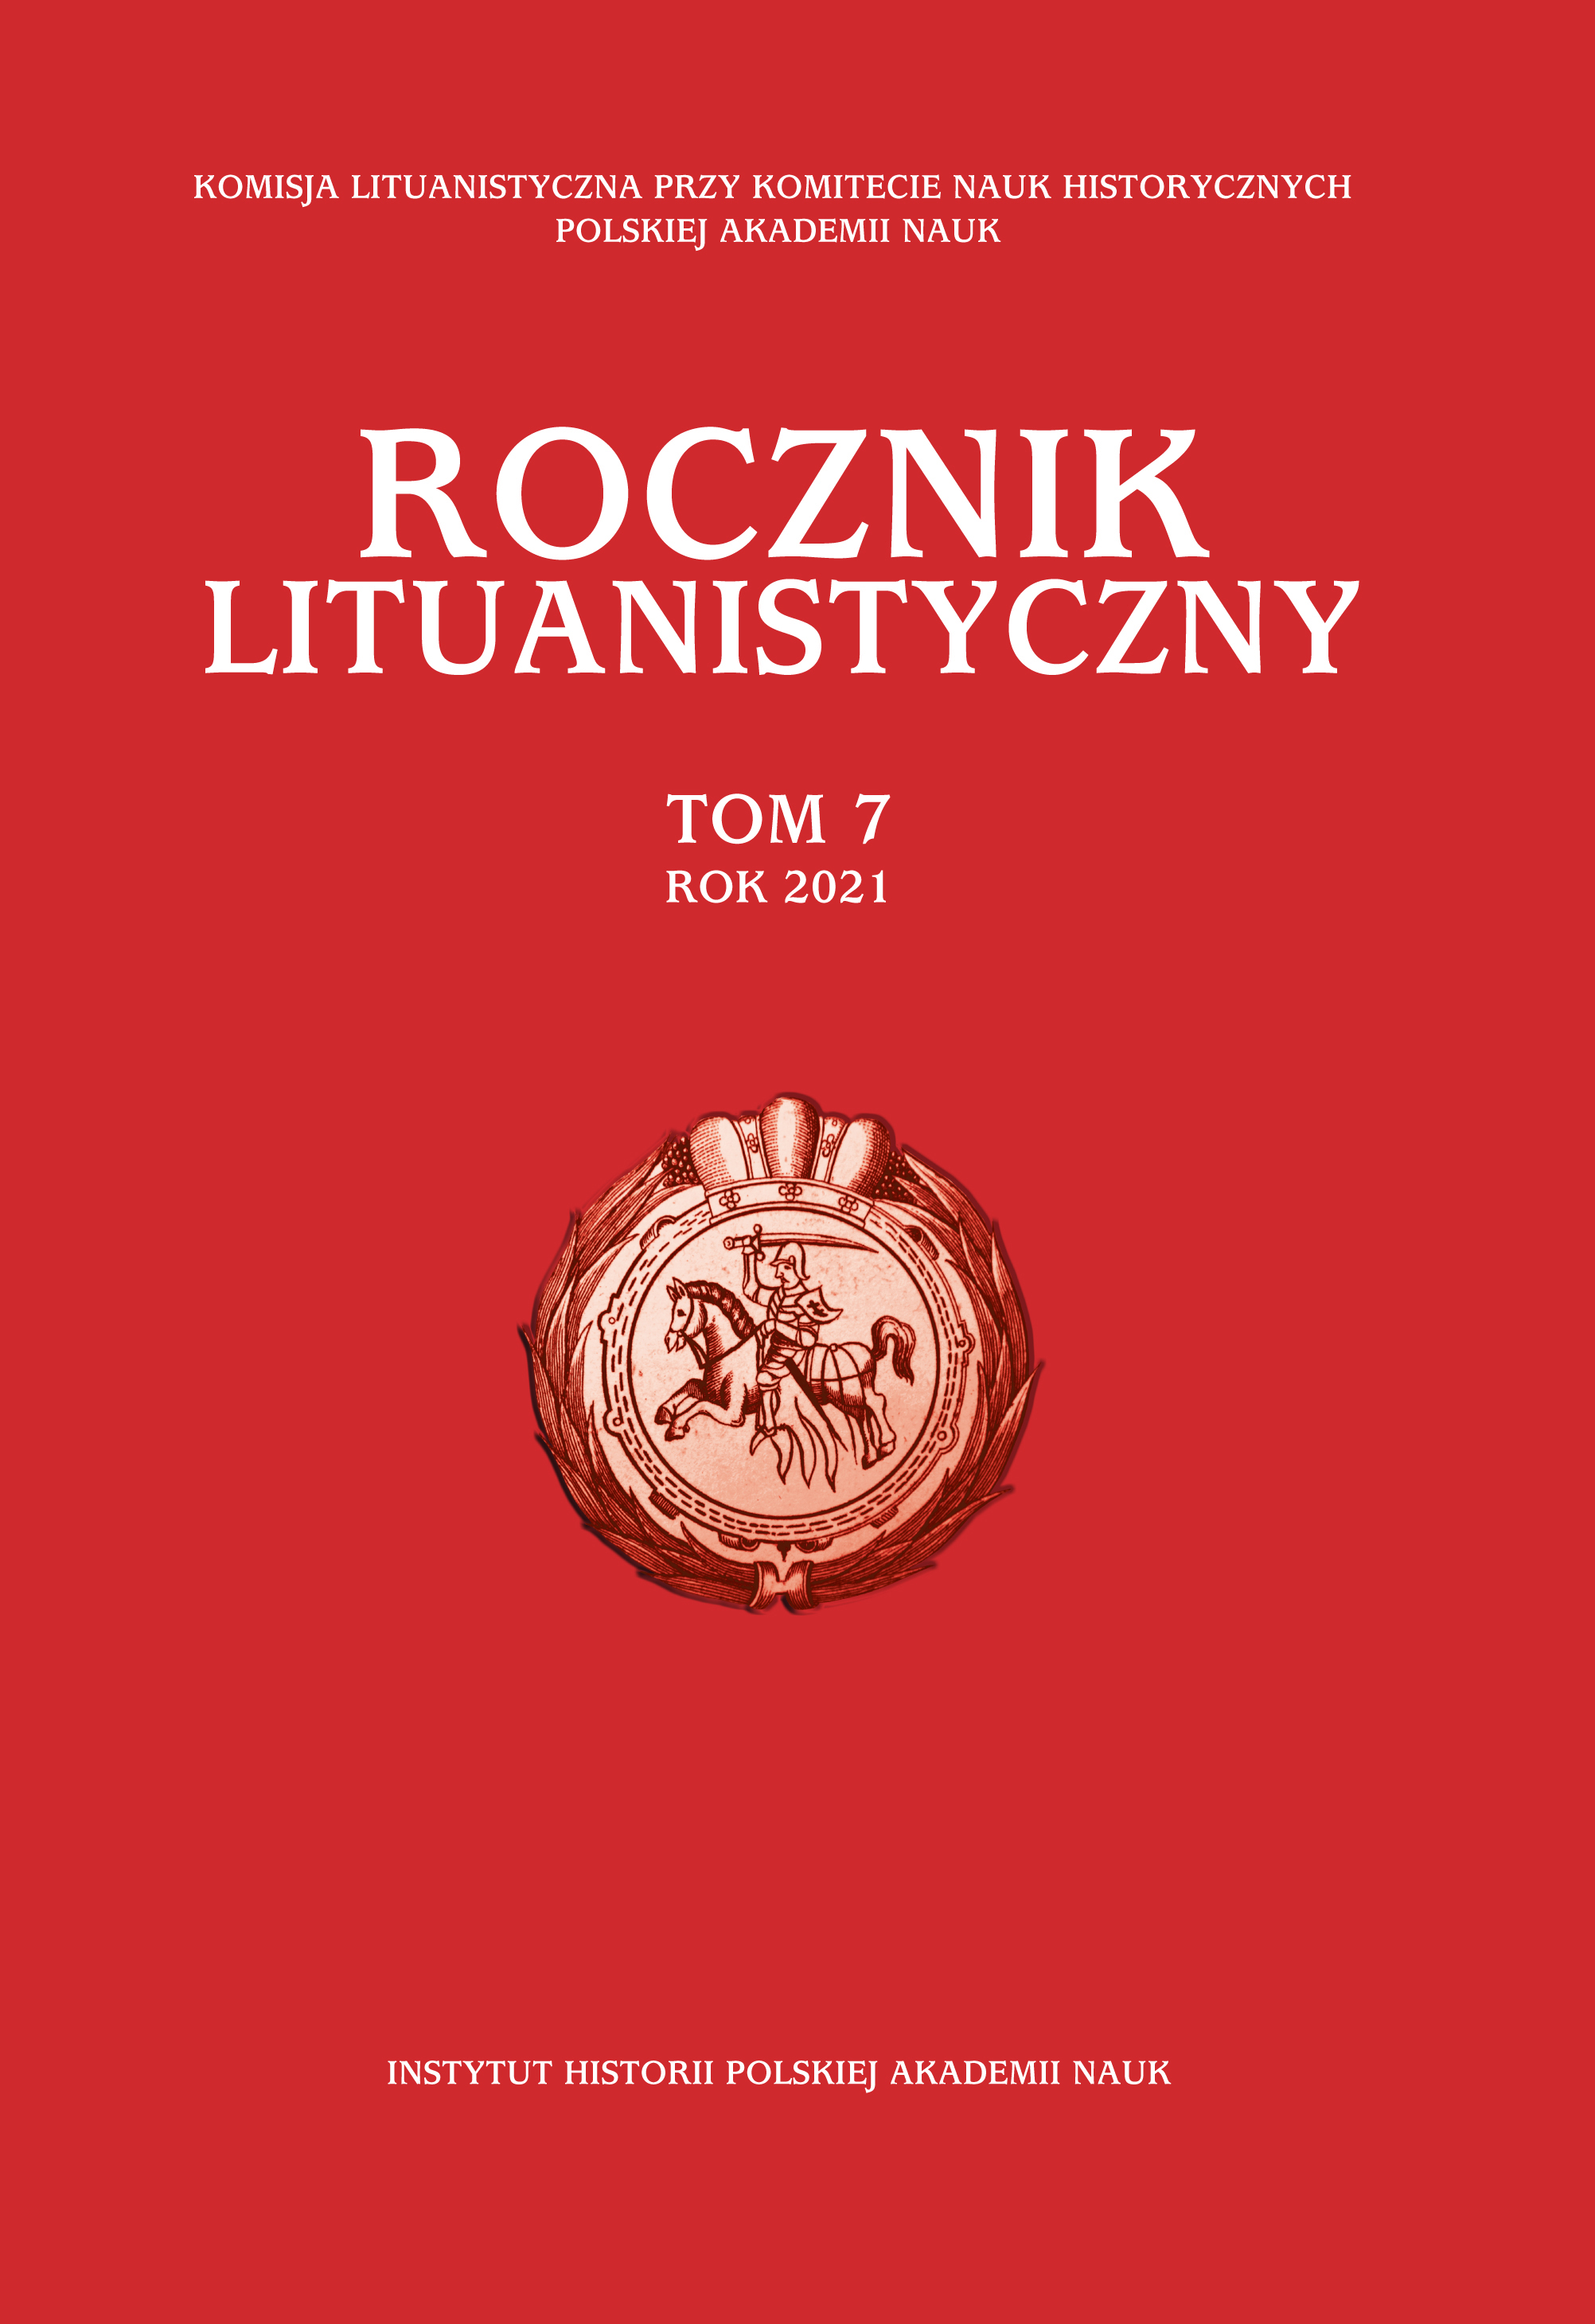 The Functioning Organisation of Bridges and Dikes in the Grand Duchy of Lithuania from the Second Half of the Fifteenth to the End of the Sixteenth Century: An Outline of Problems Cover Image